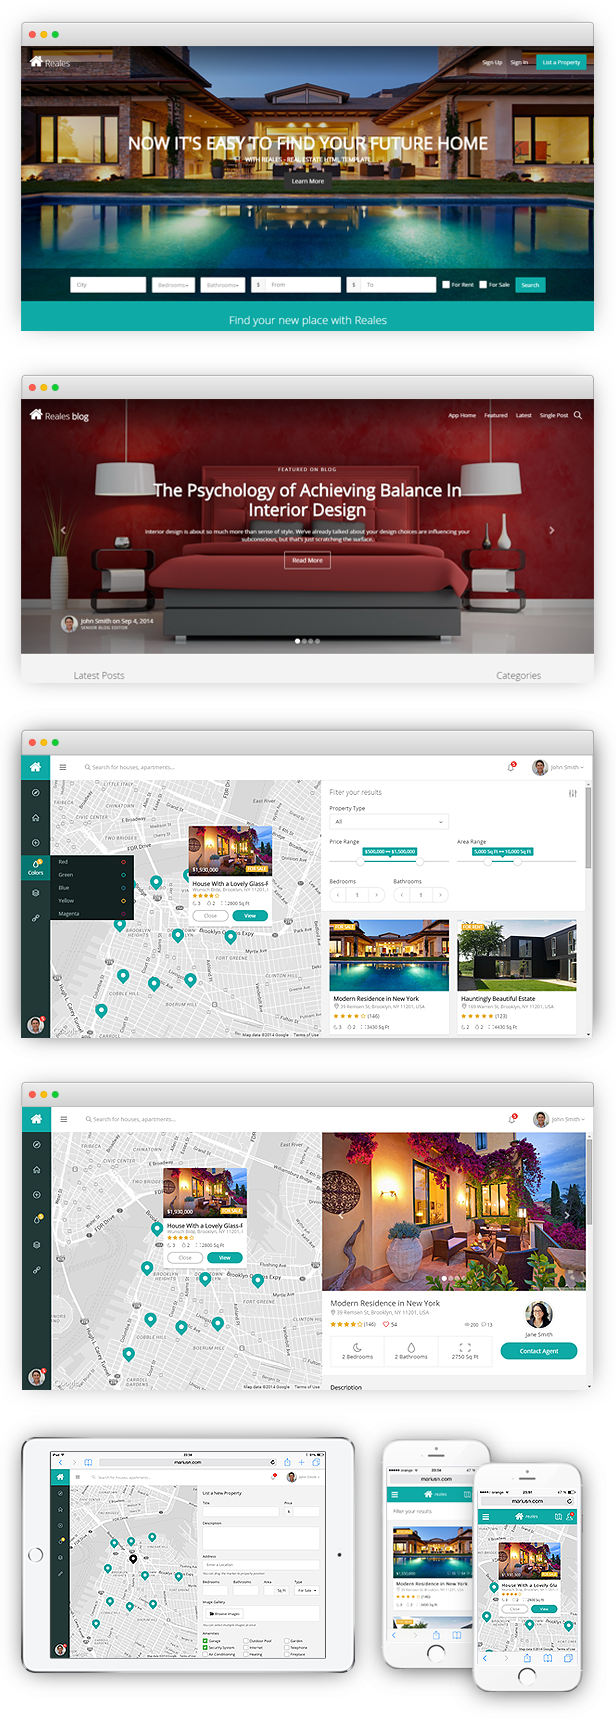 Reales - Real Estate Web Application Template - 1